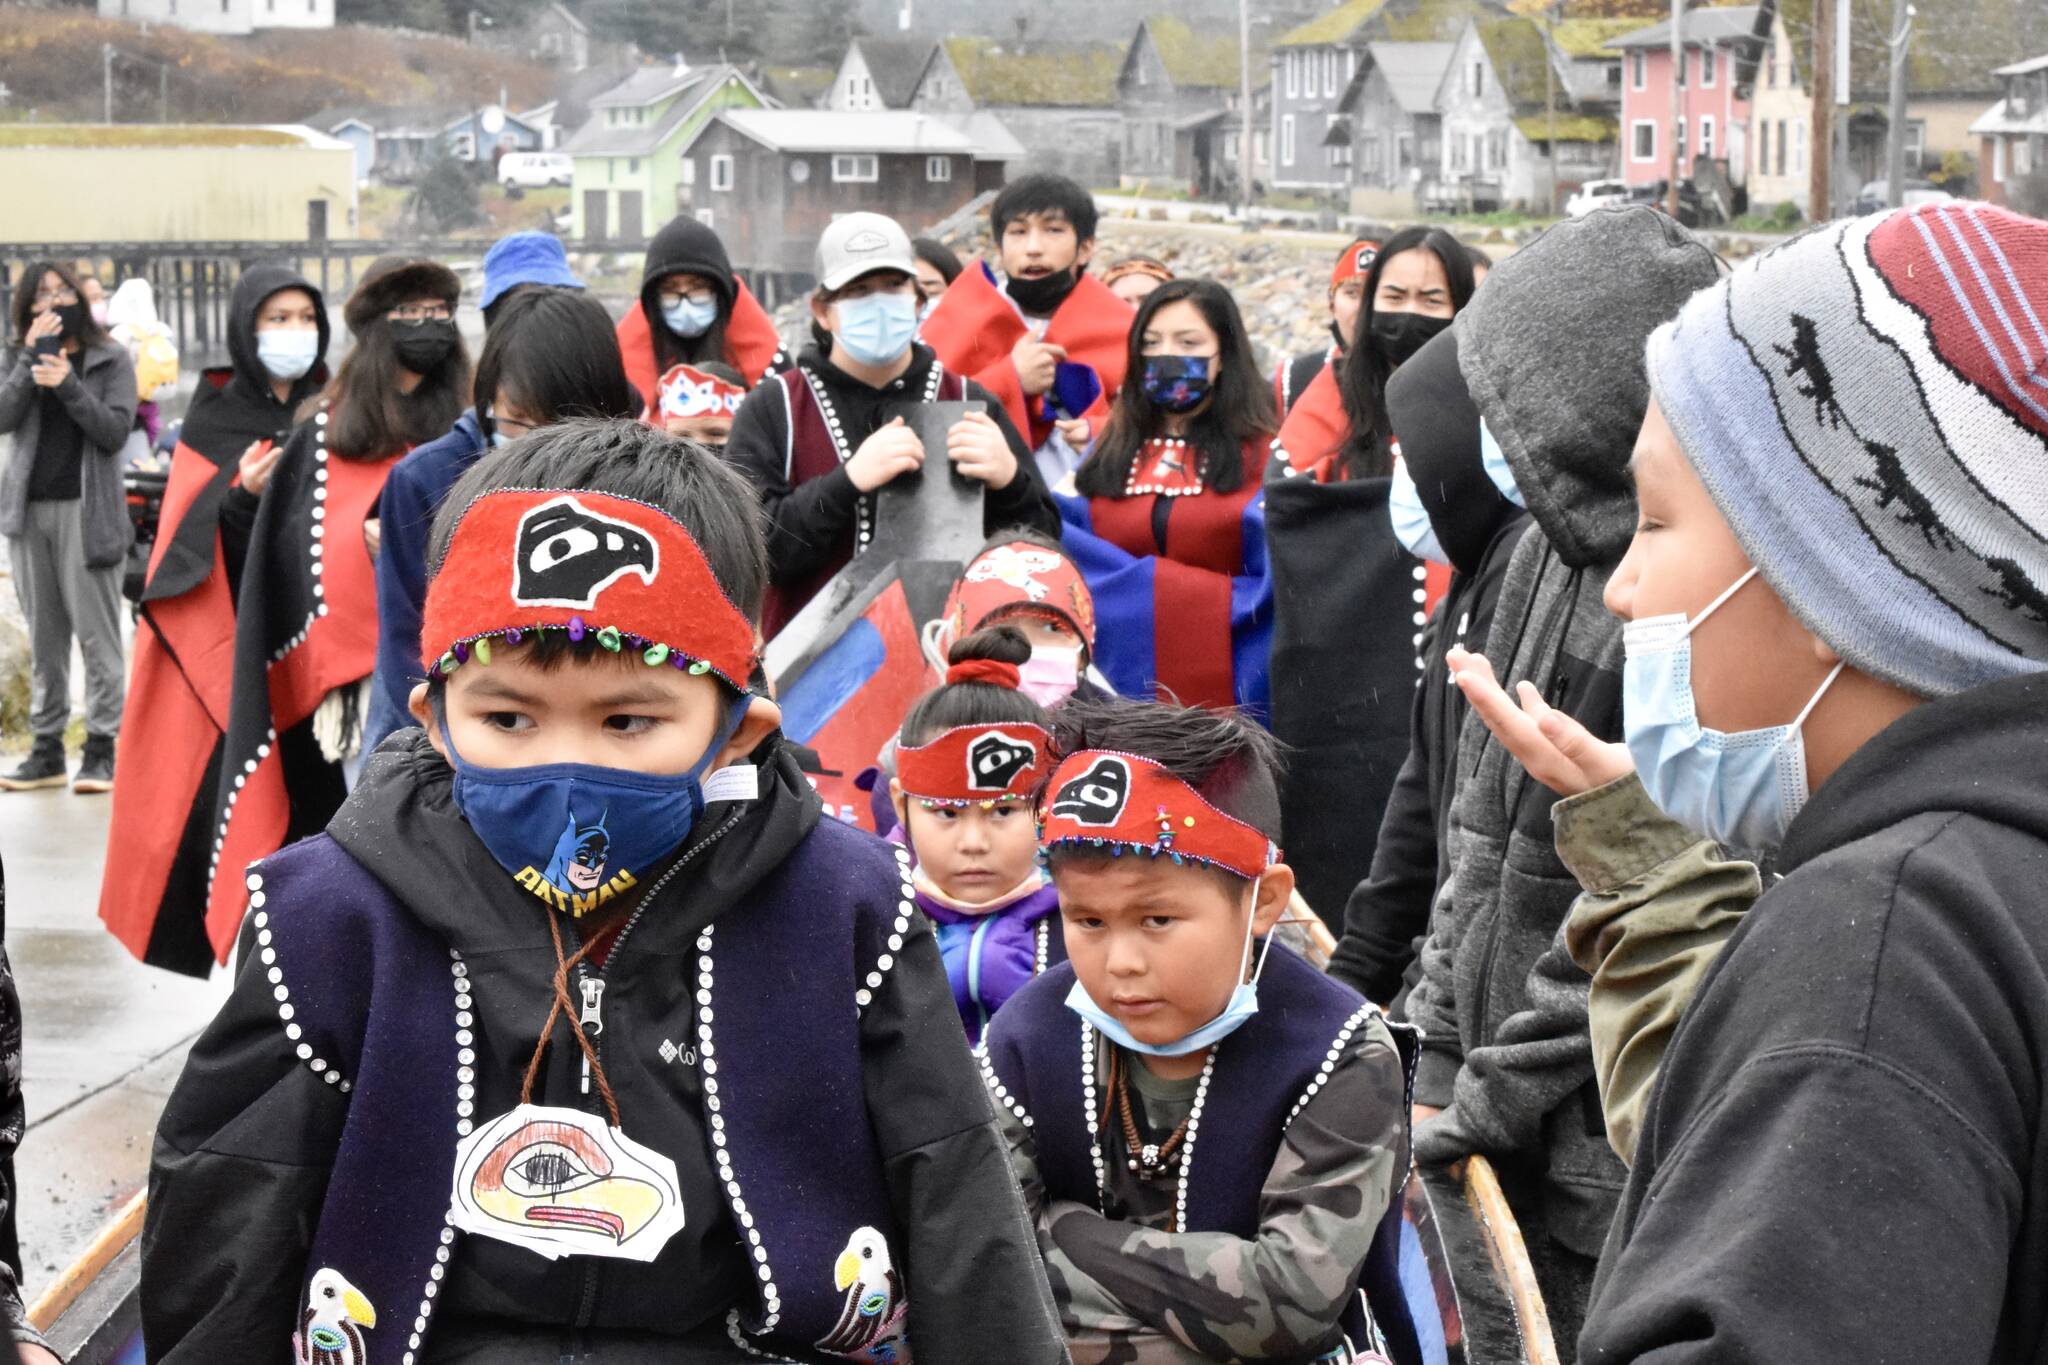 Students from Angoon donned their regalia on Tuesday, Oct. 26, 2021, for the 139th anniversary of the bombardment of Angoon by the U.S. Navy. Despite the violence, Angoon residents say the fact the village remains is a testament to their endurance. (Peter Segall / Juneau Empire)